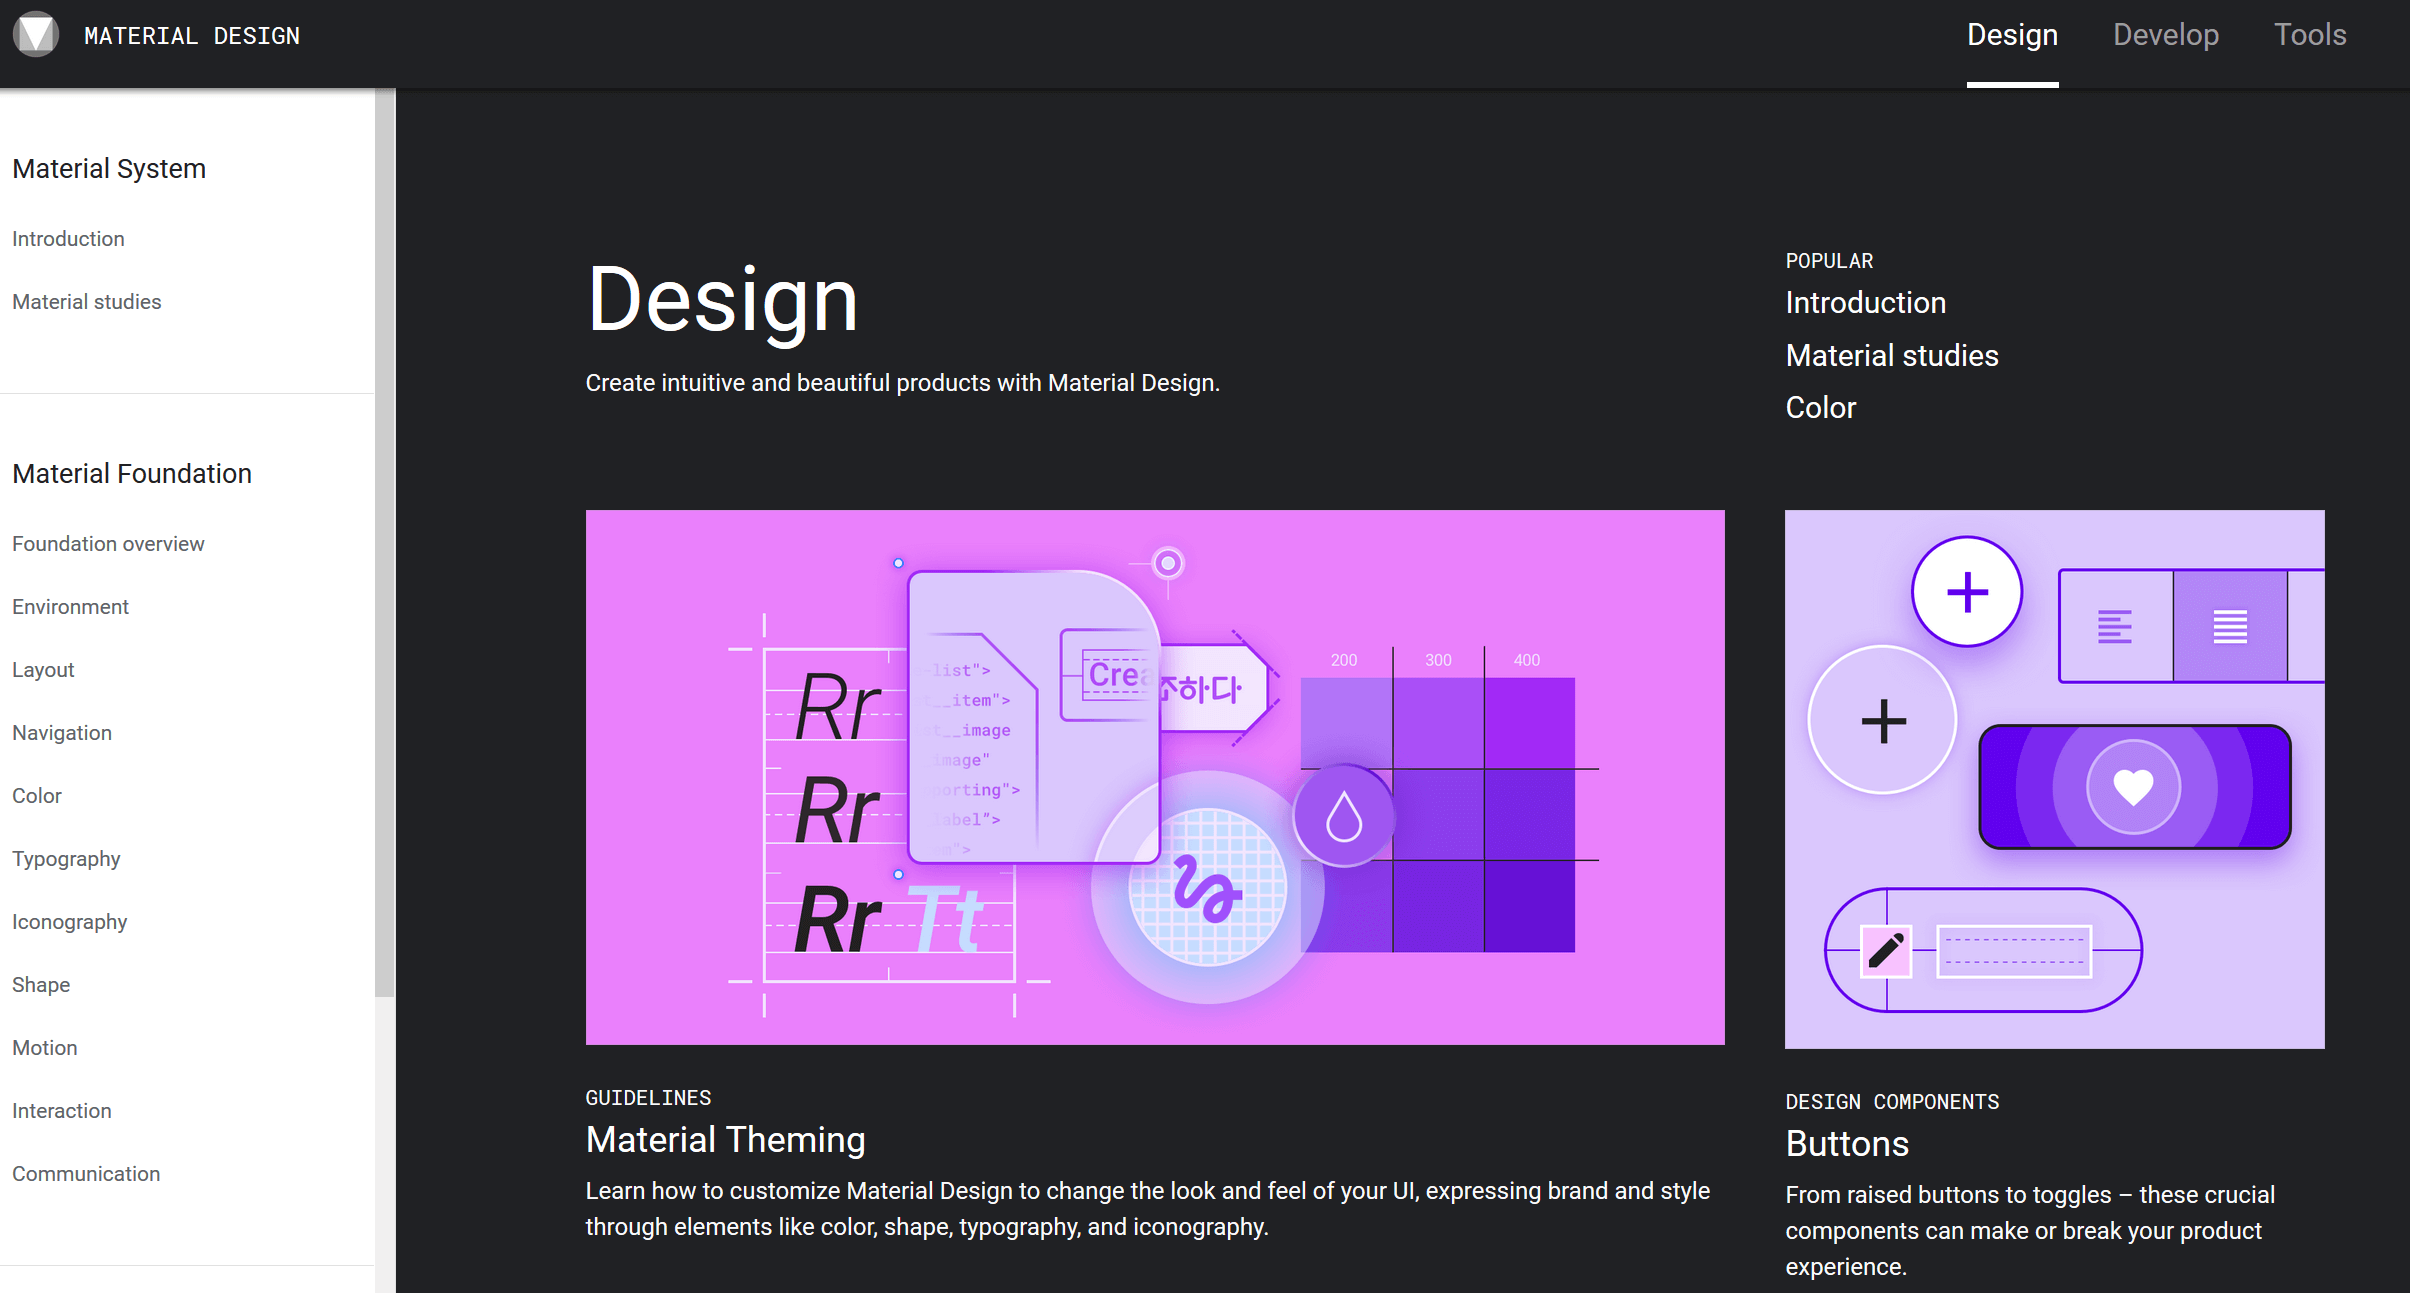 Material Design by Google